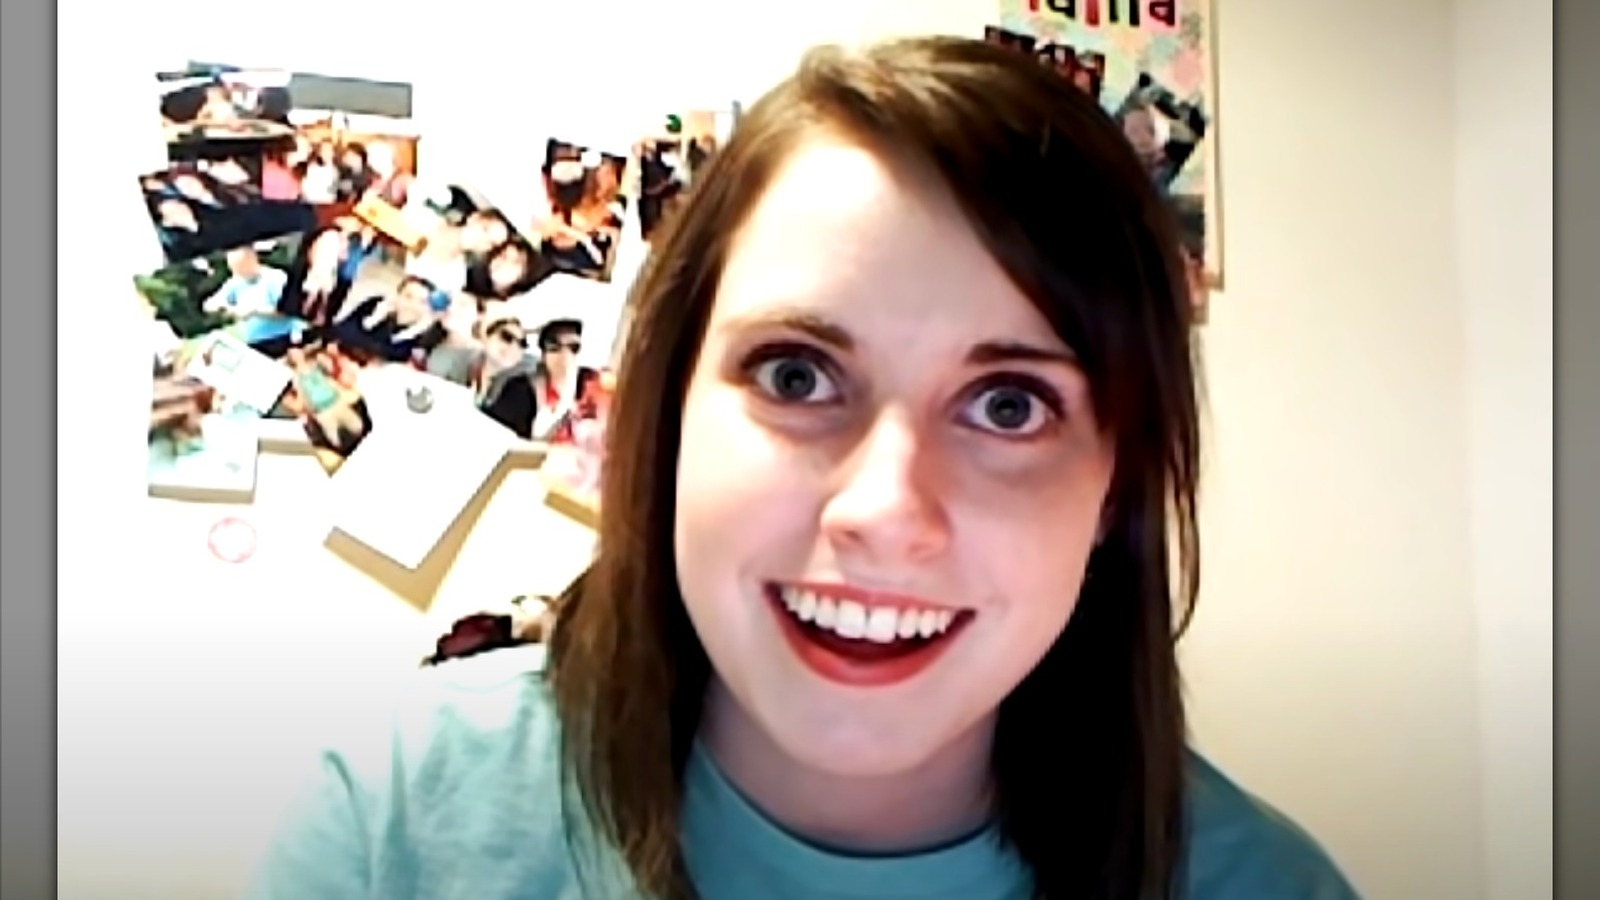 overly attached girlfriend now